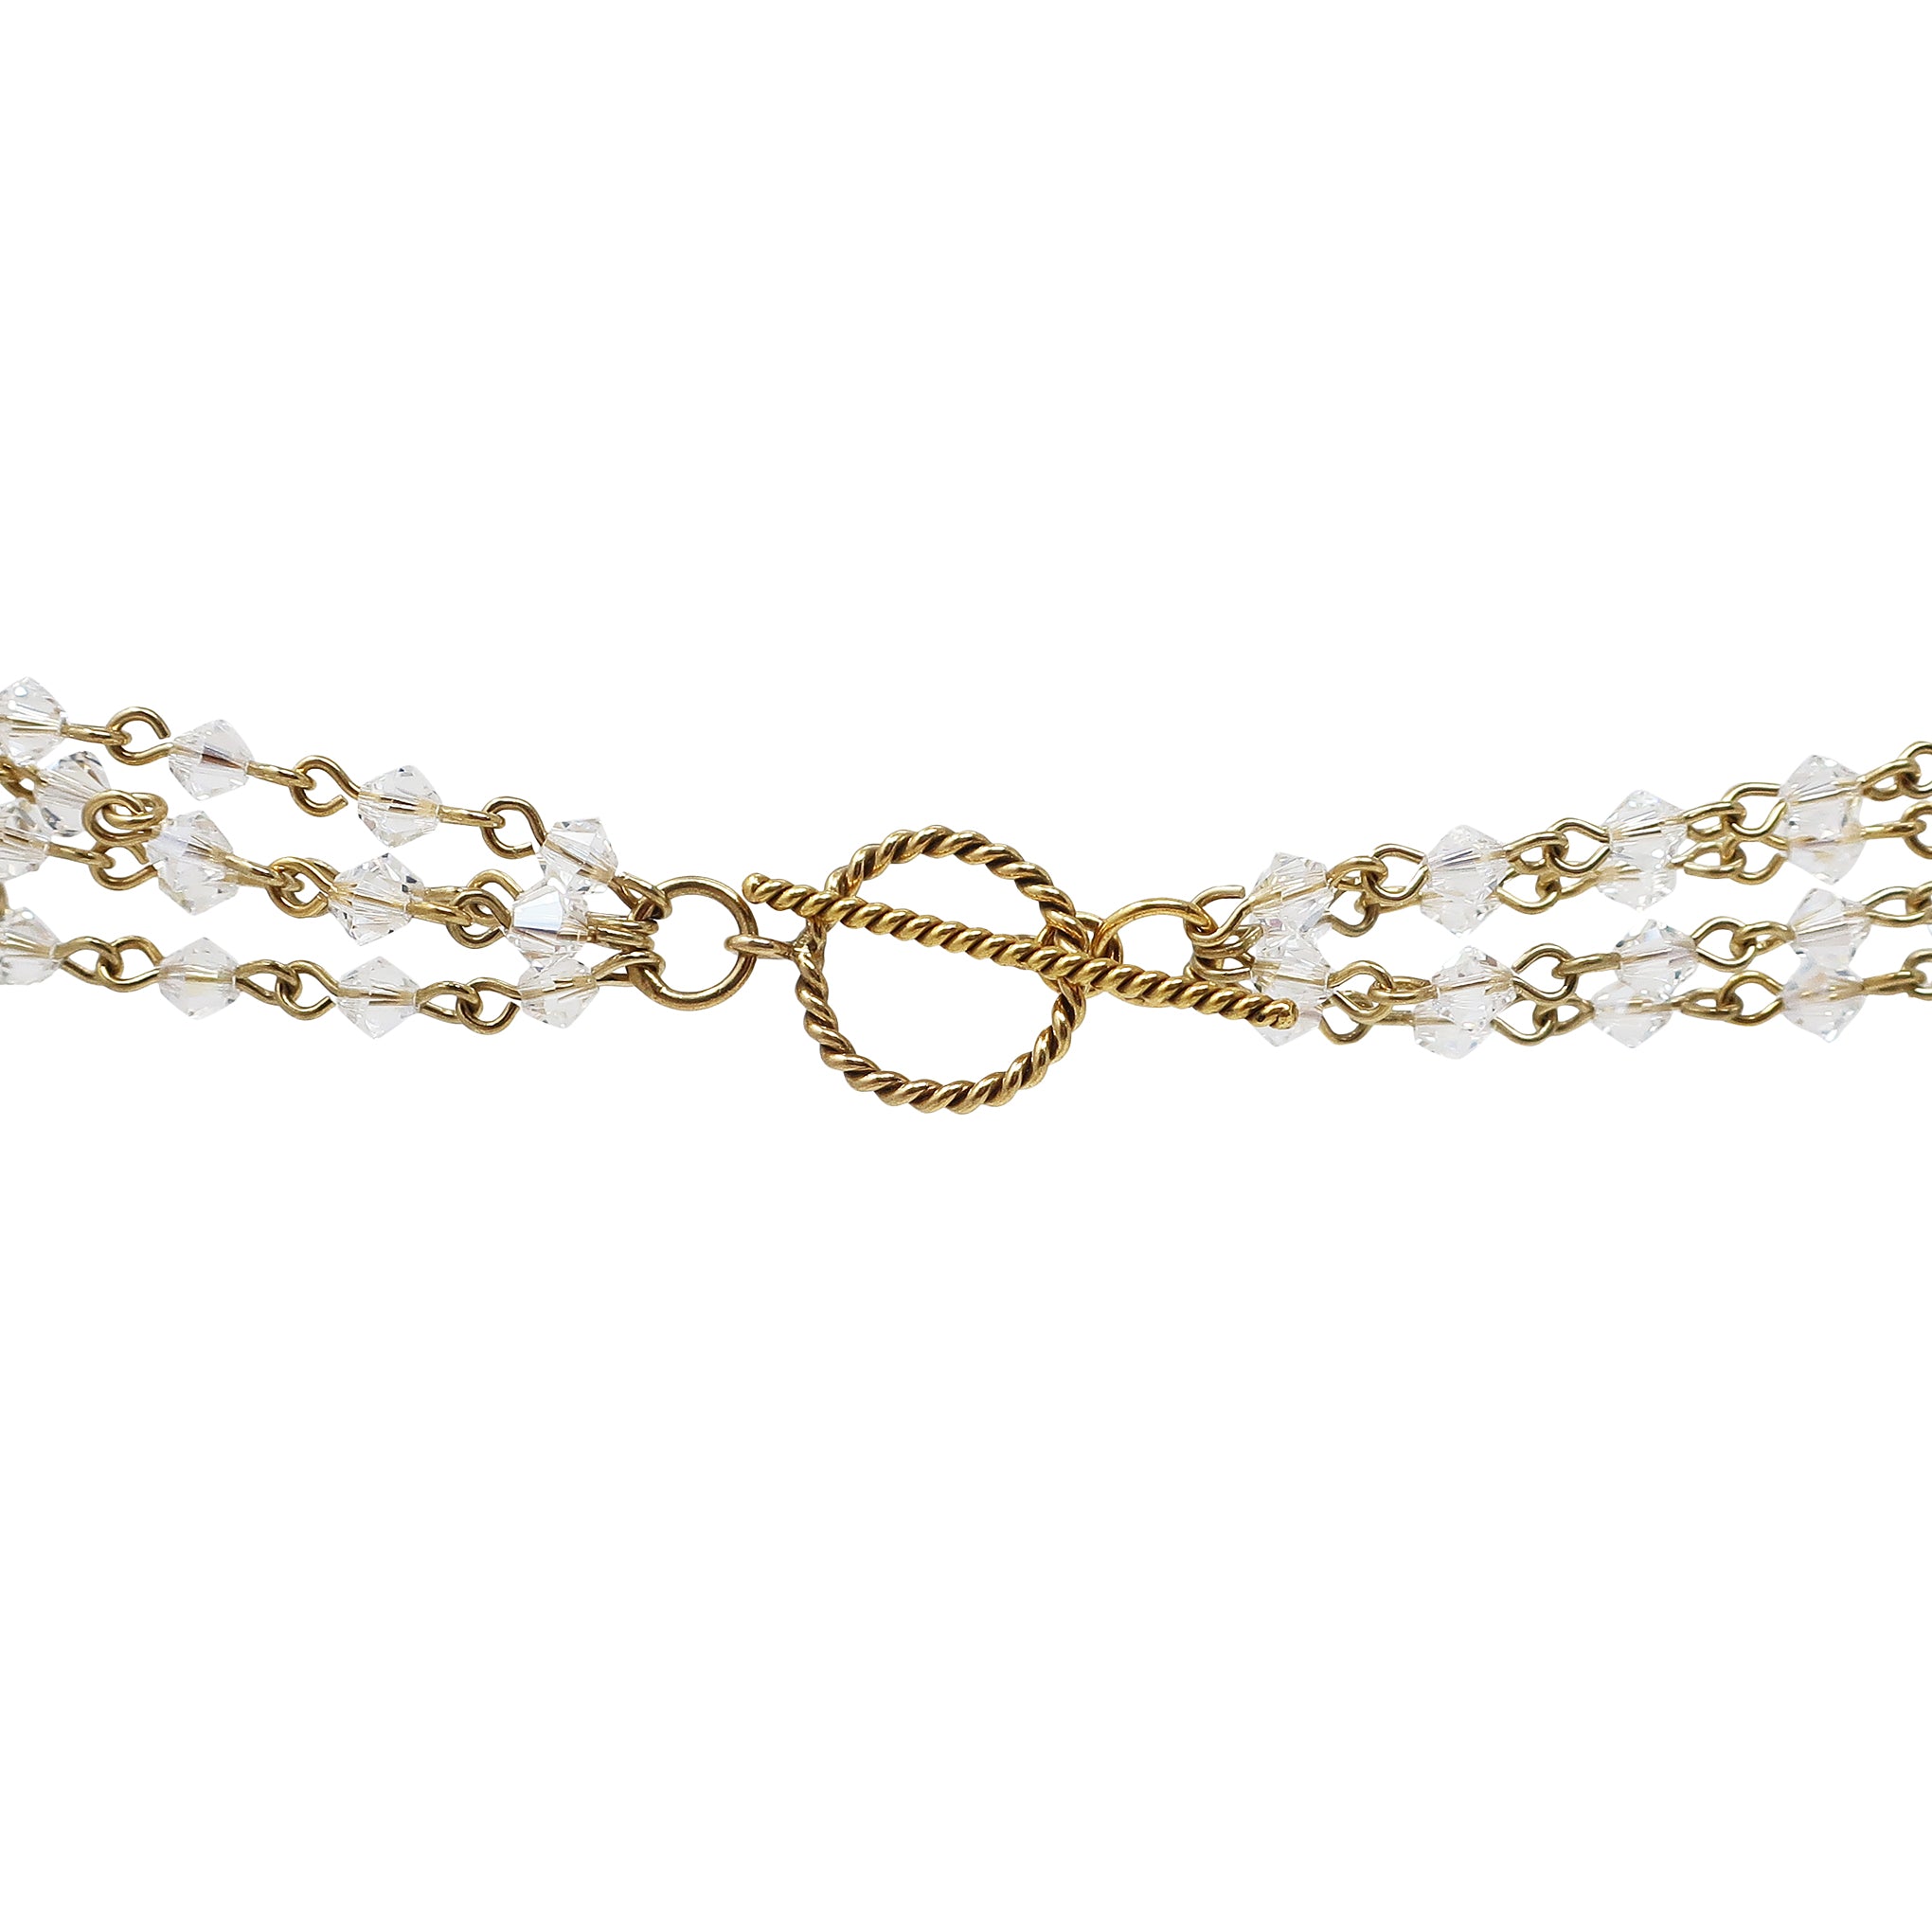 VSA Maria Cross Magdalena Necklace in Gold and Bicone Clear Crystal